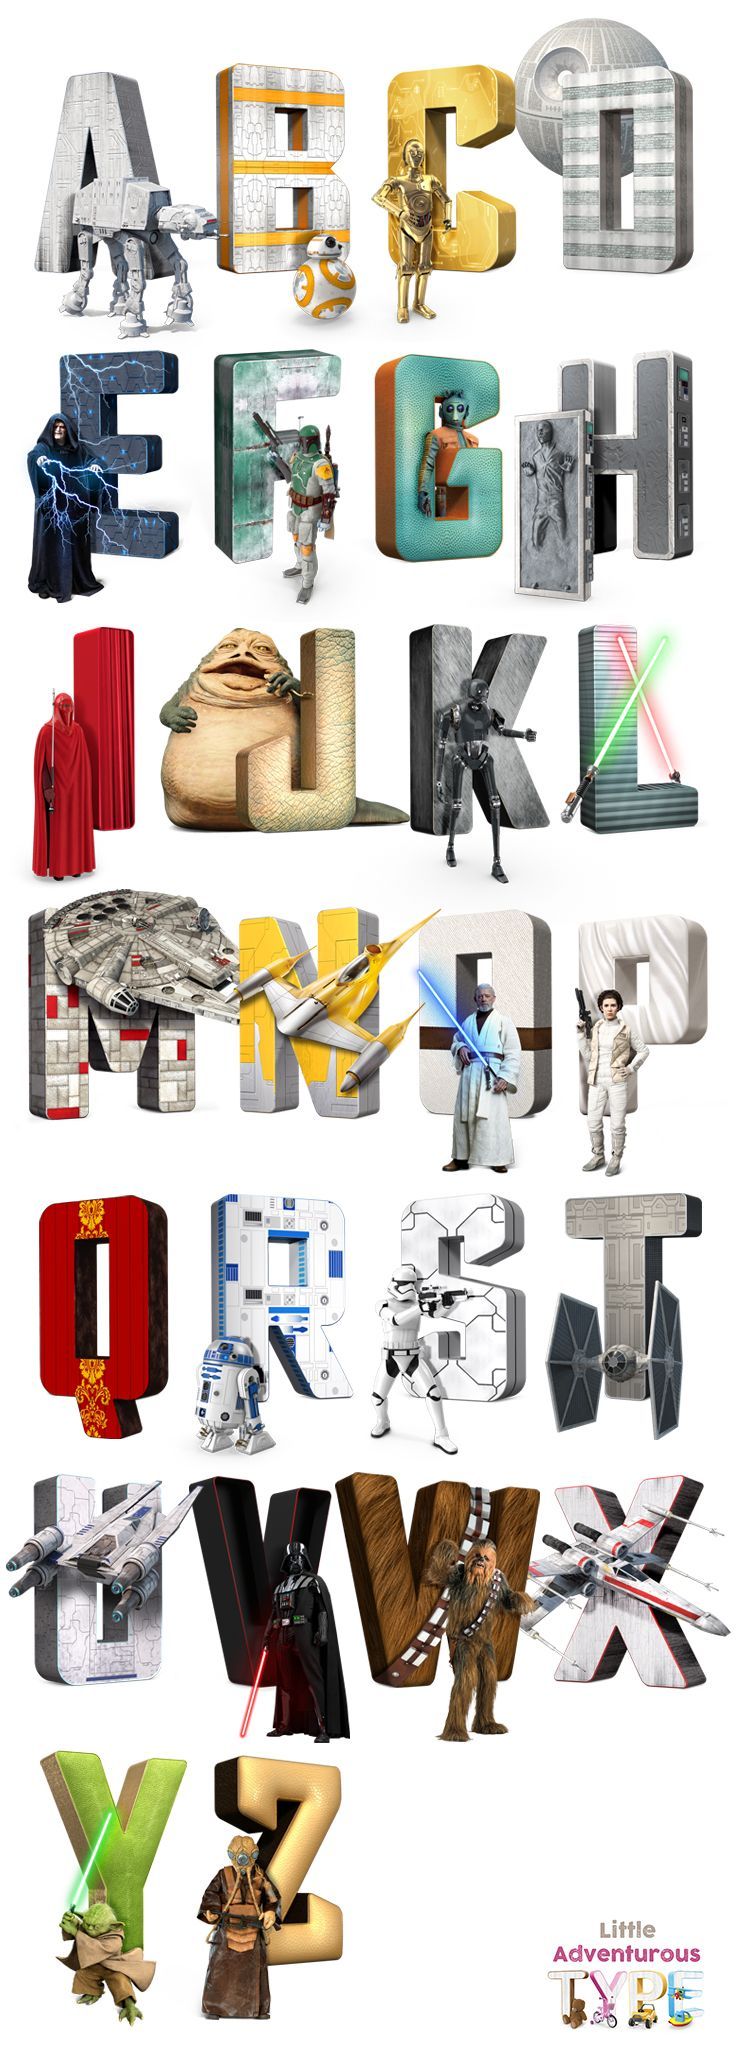 star wars personalised gifts